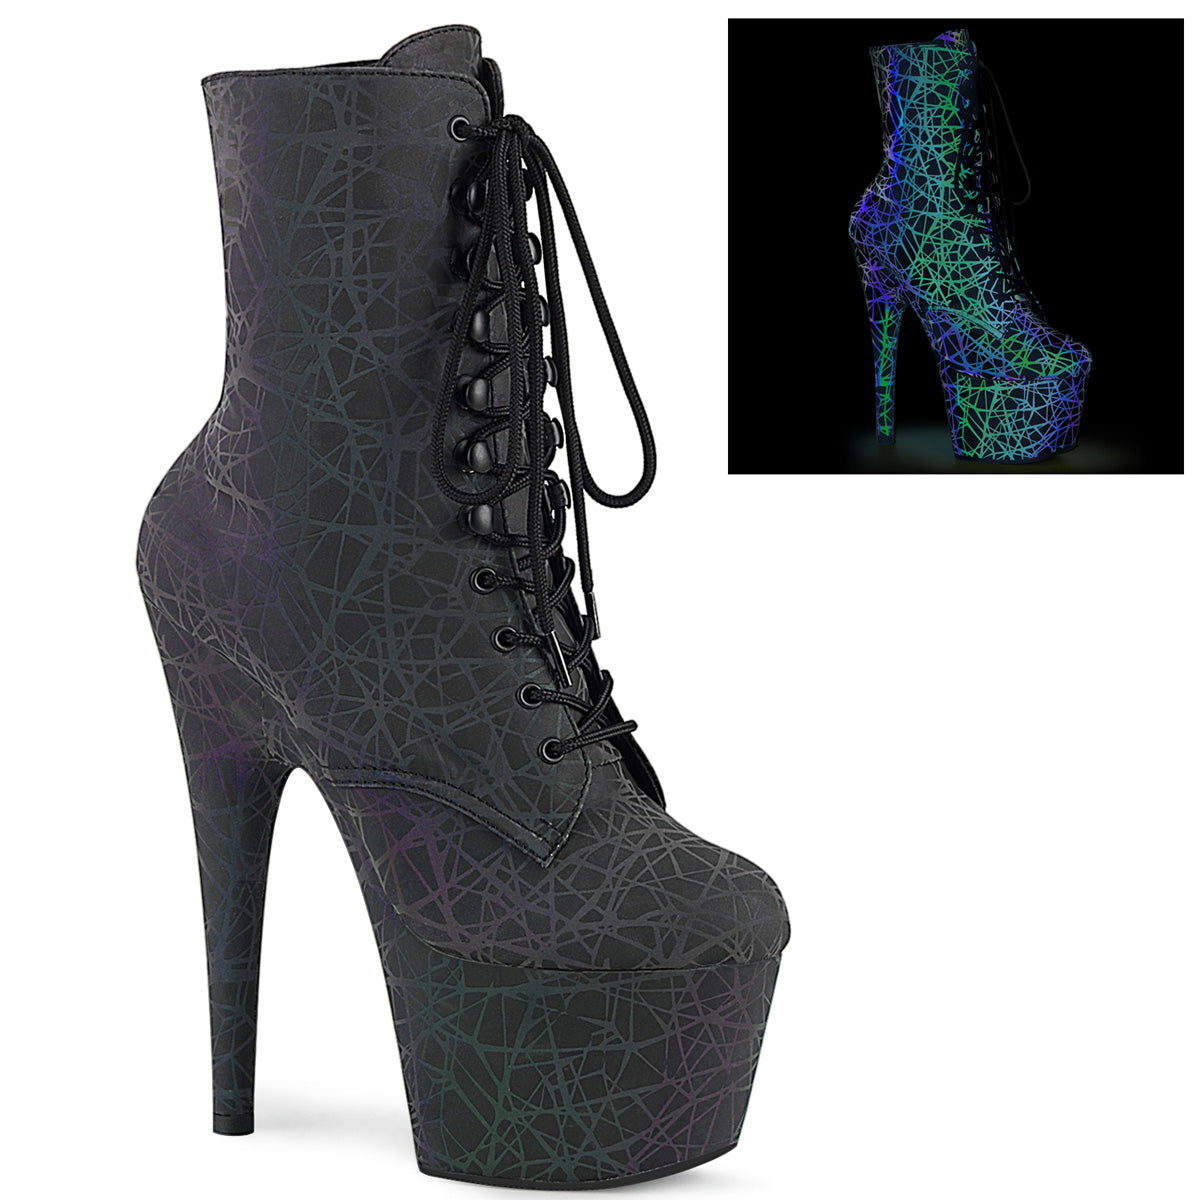 Pleaser Womens Ankle Boots ADORE-1020REFL Green-Purple Refl./Green-Purple Refl.